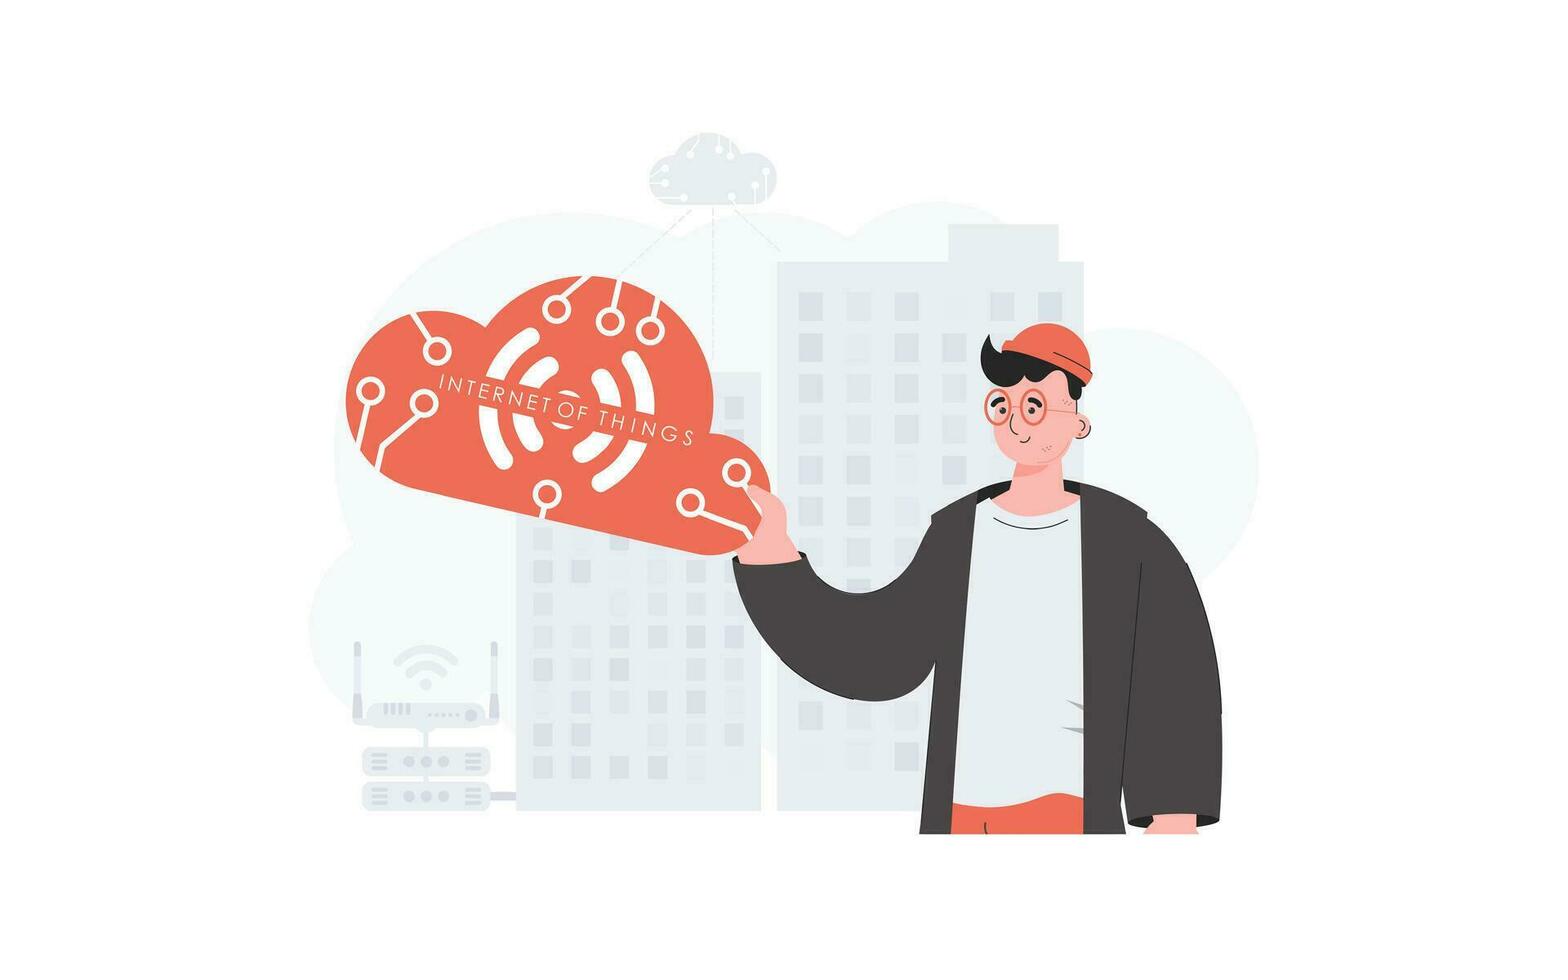 The guy is holding an internet thing icon in his hands. Internet of things and automation concept. Good for presentations and websites. Vector illustration in flat style.